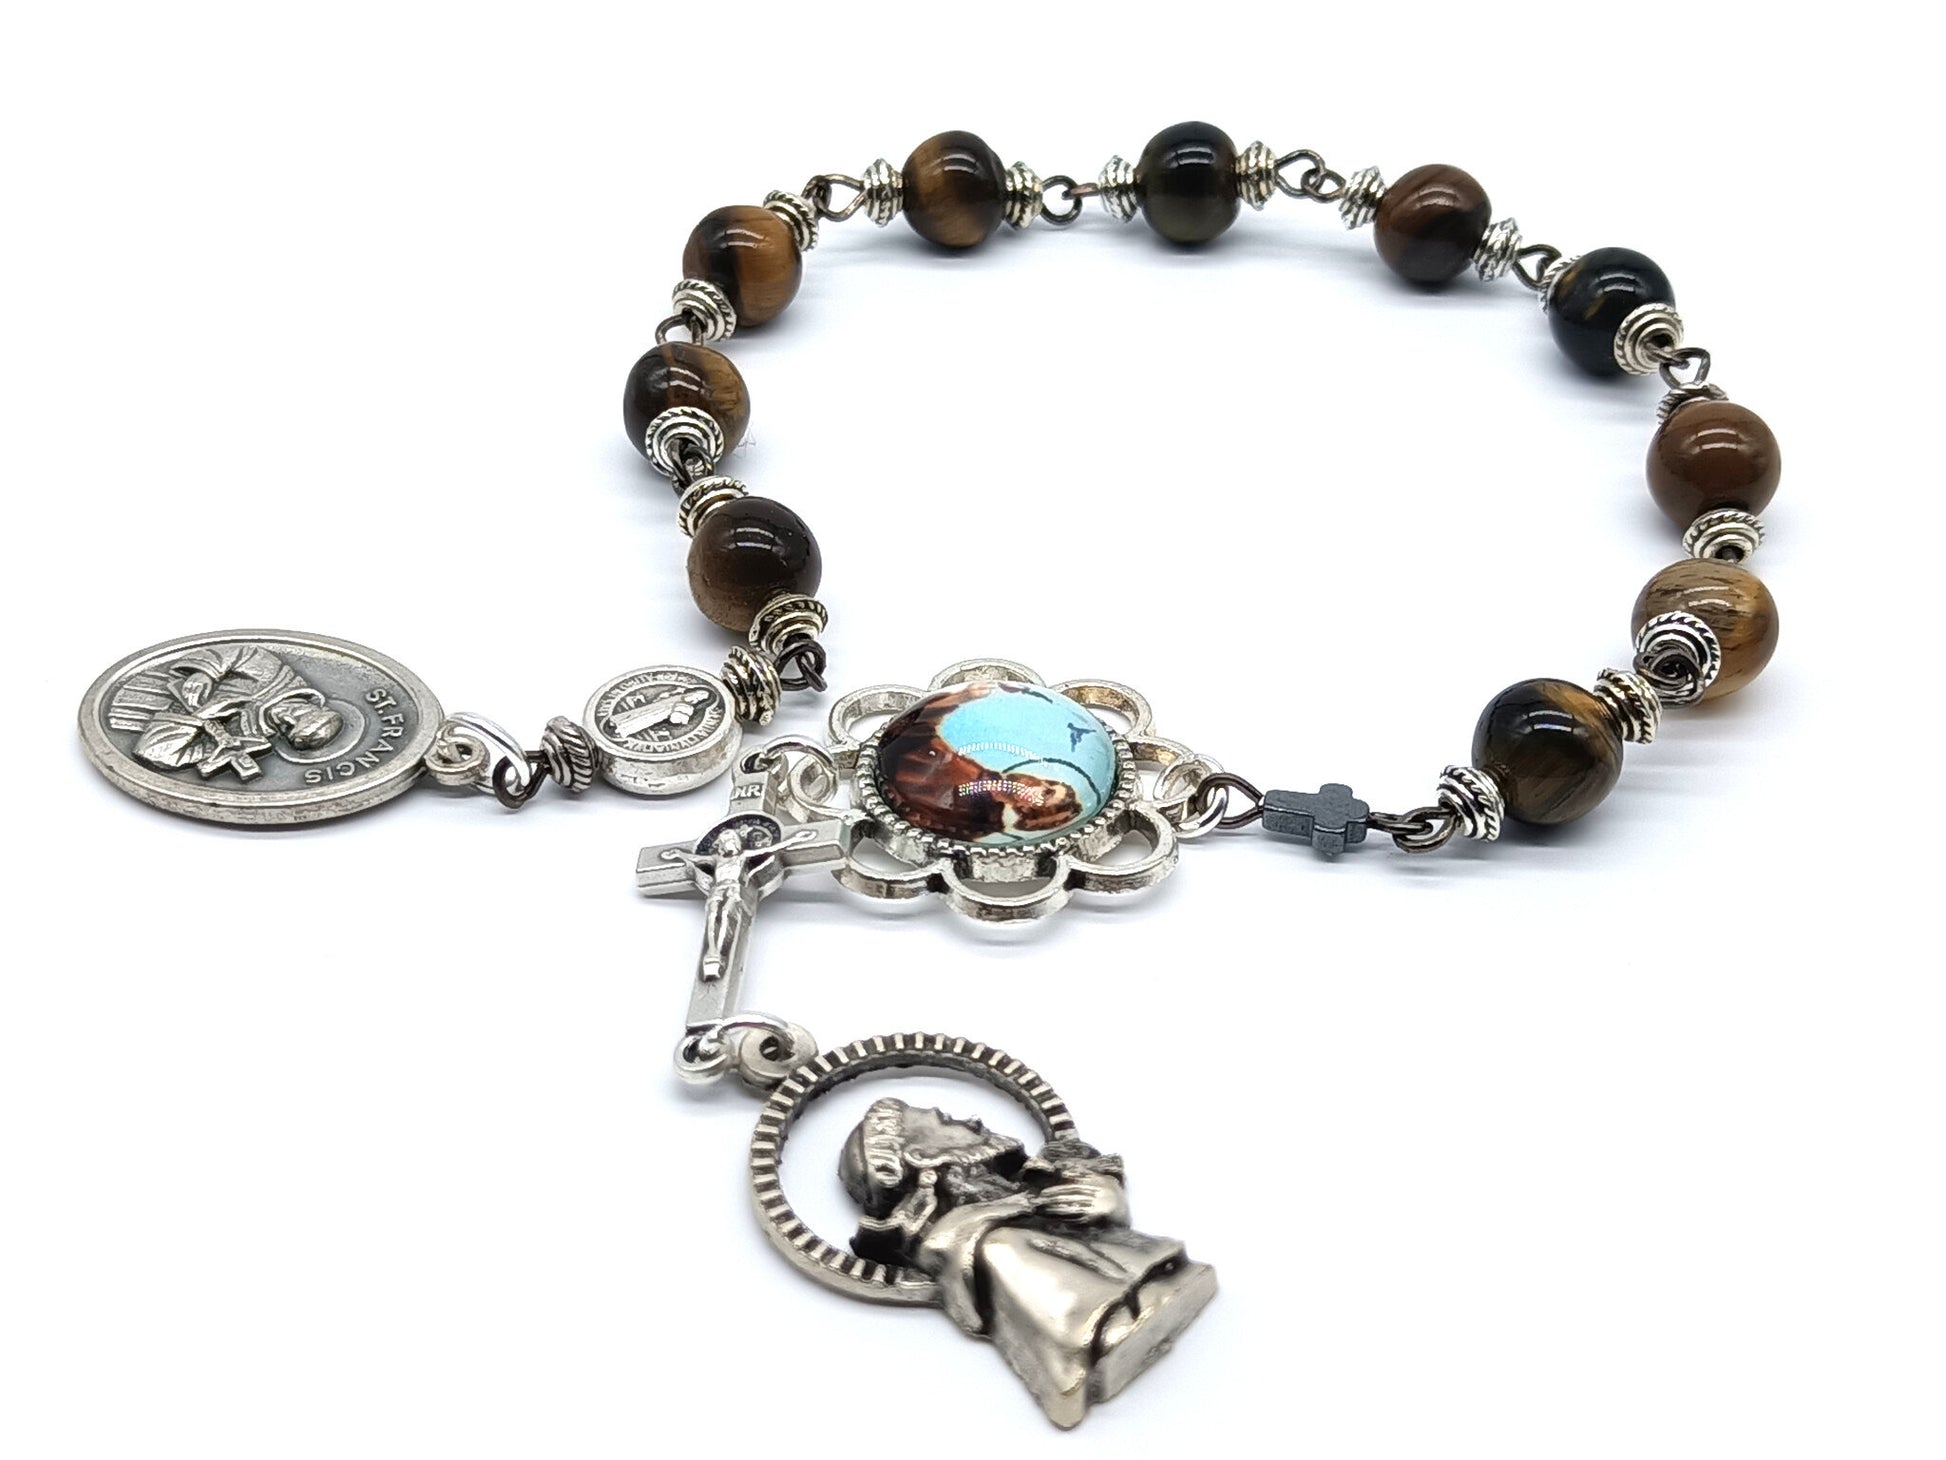 Saint Francis of Assisi unique rosary beads single decade with tigers eye gemstone beads, silver crucifix, medals and picture medal pater bead.